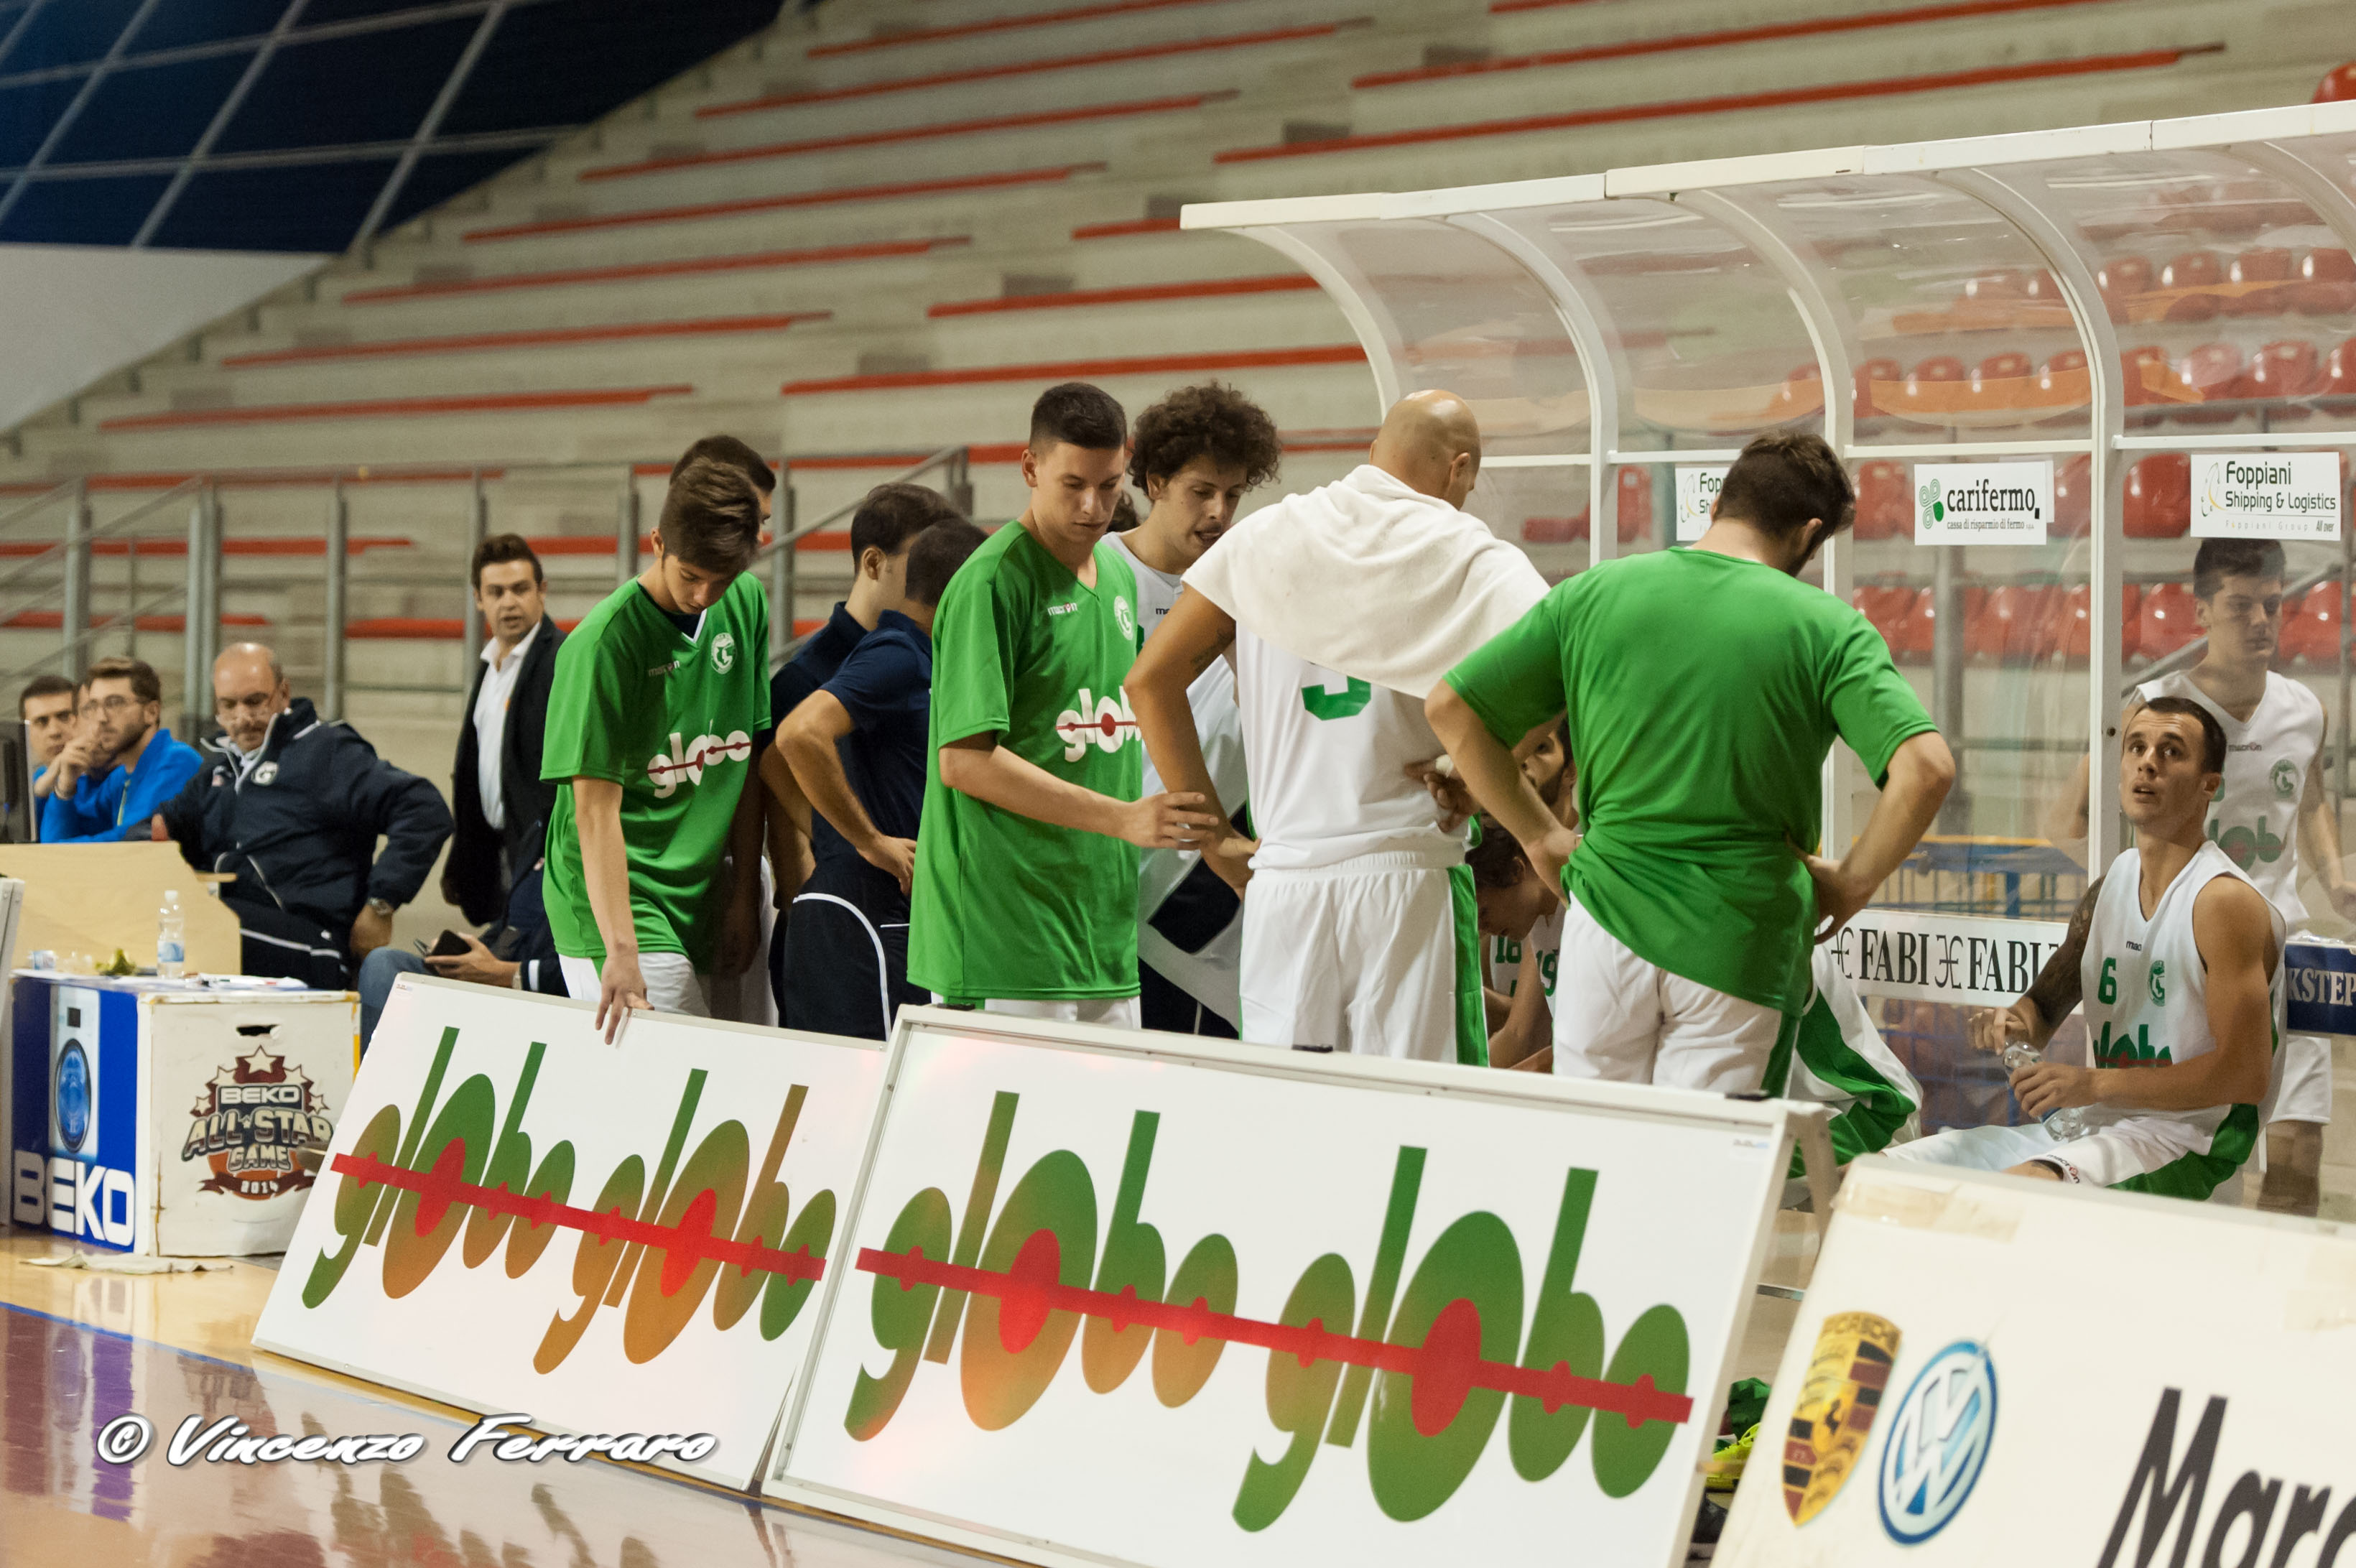 46-stamura ancona-time out